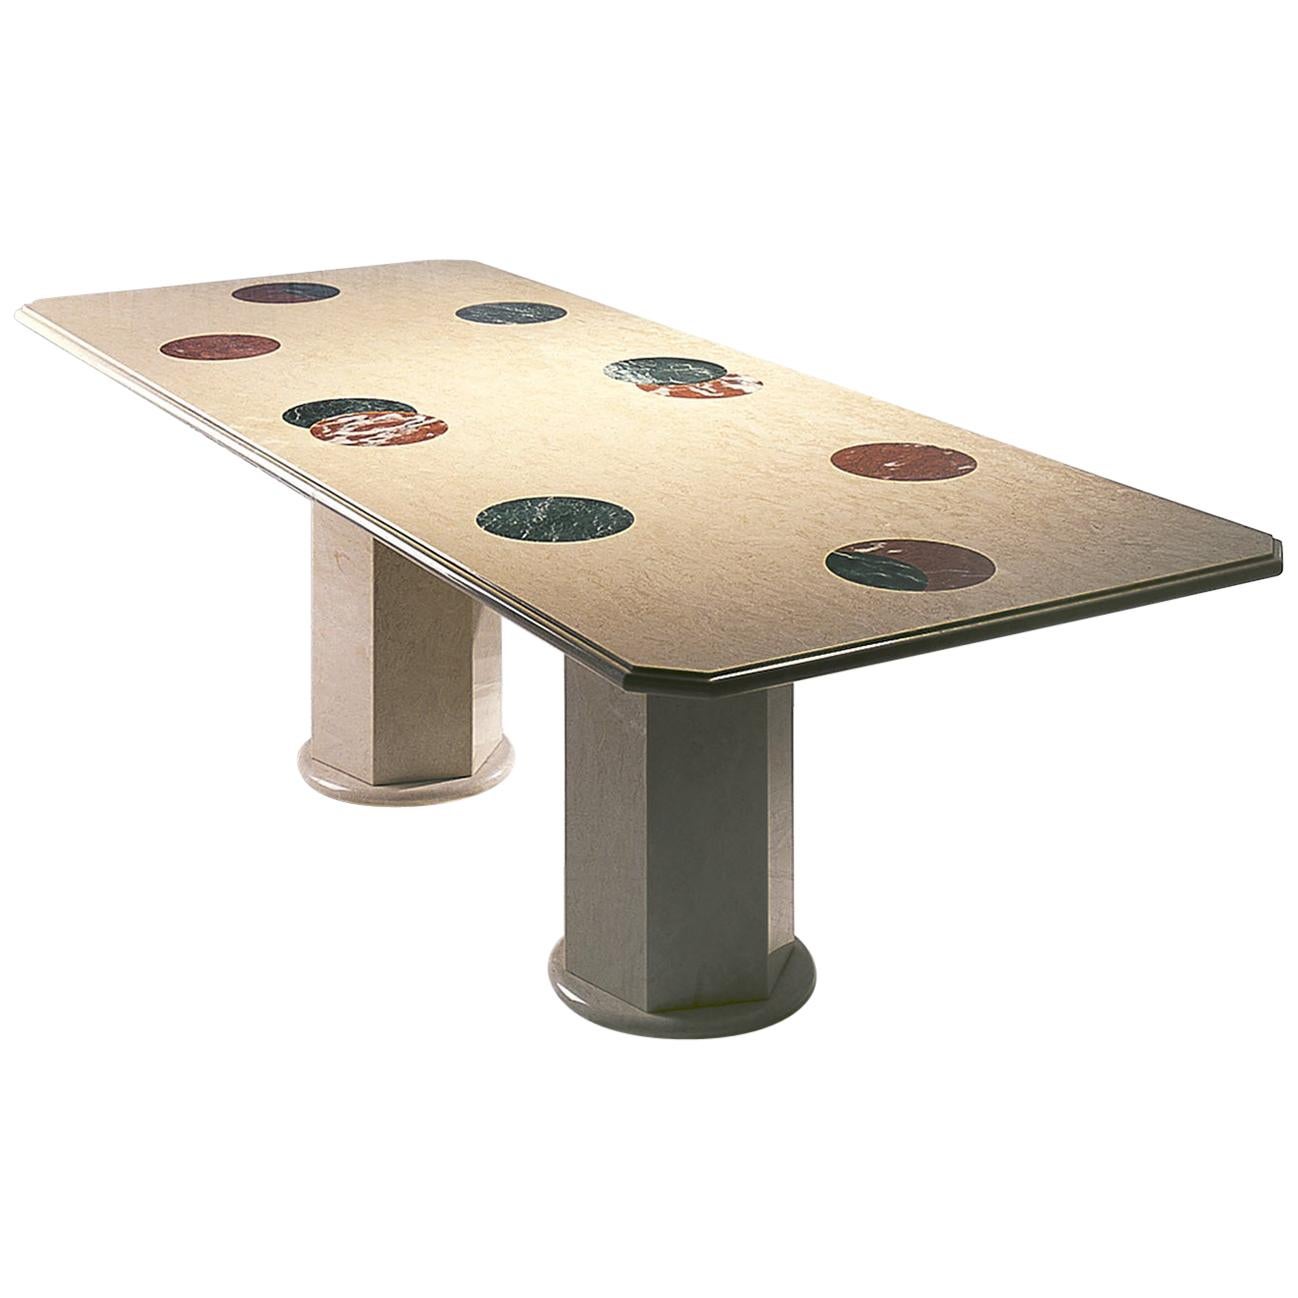 21st Century by Arch.A.Natalini Polychrome Marble Table with Inlaid Moon Phases